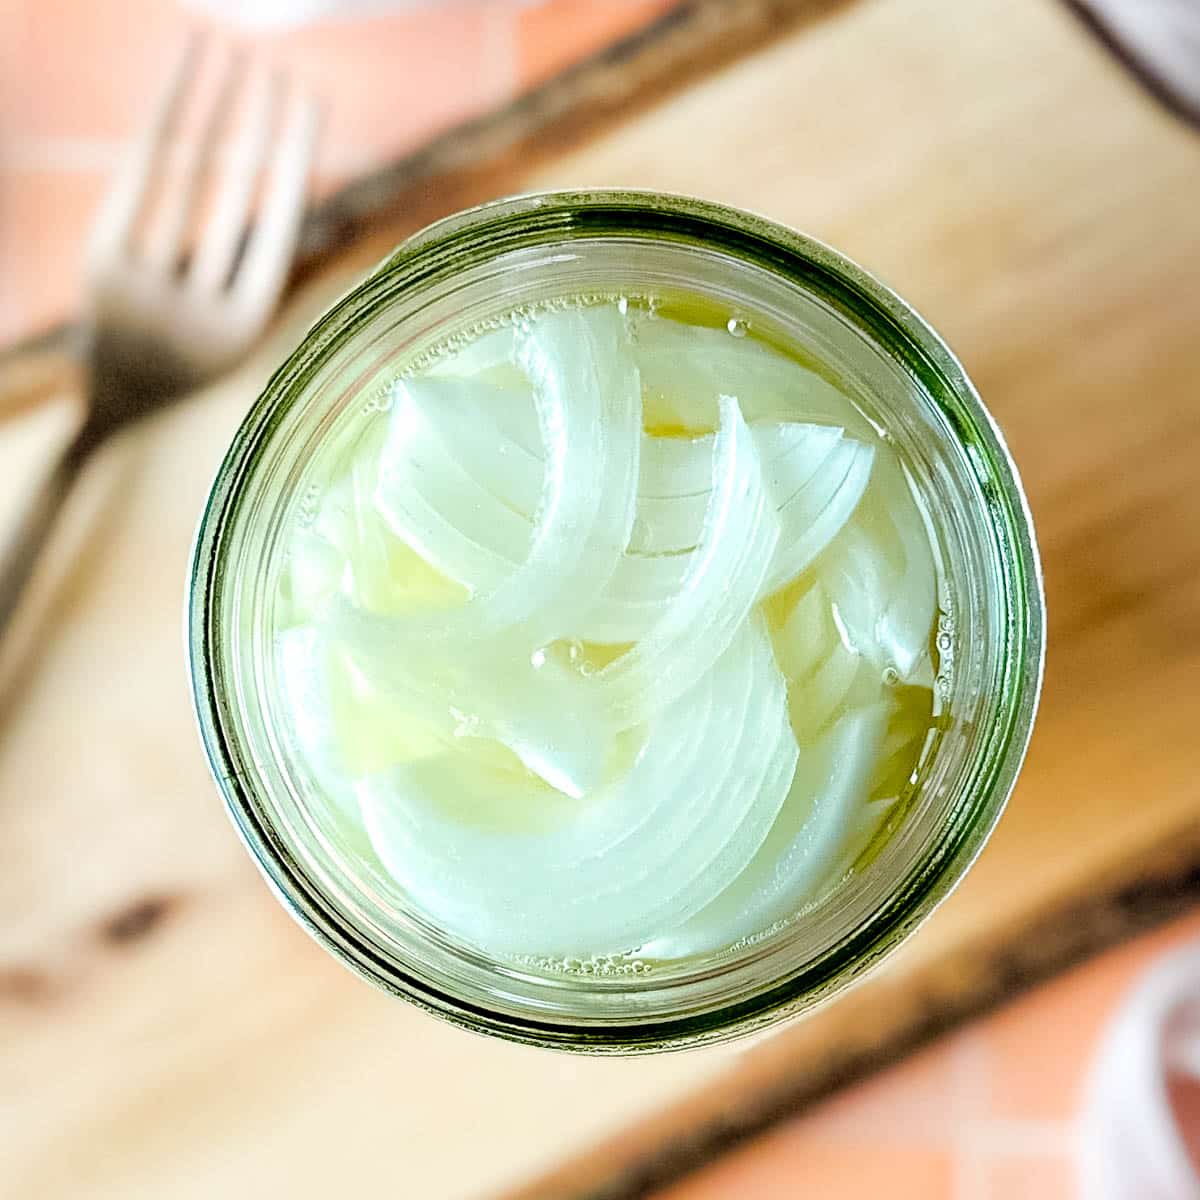 Pickled white onions in a glass jar on a wooden cutting board surrounded by white onions, a fork, and a pink linen.